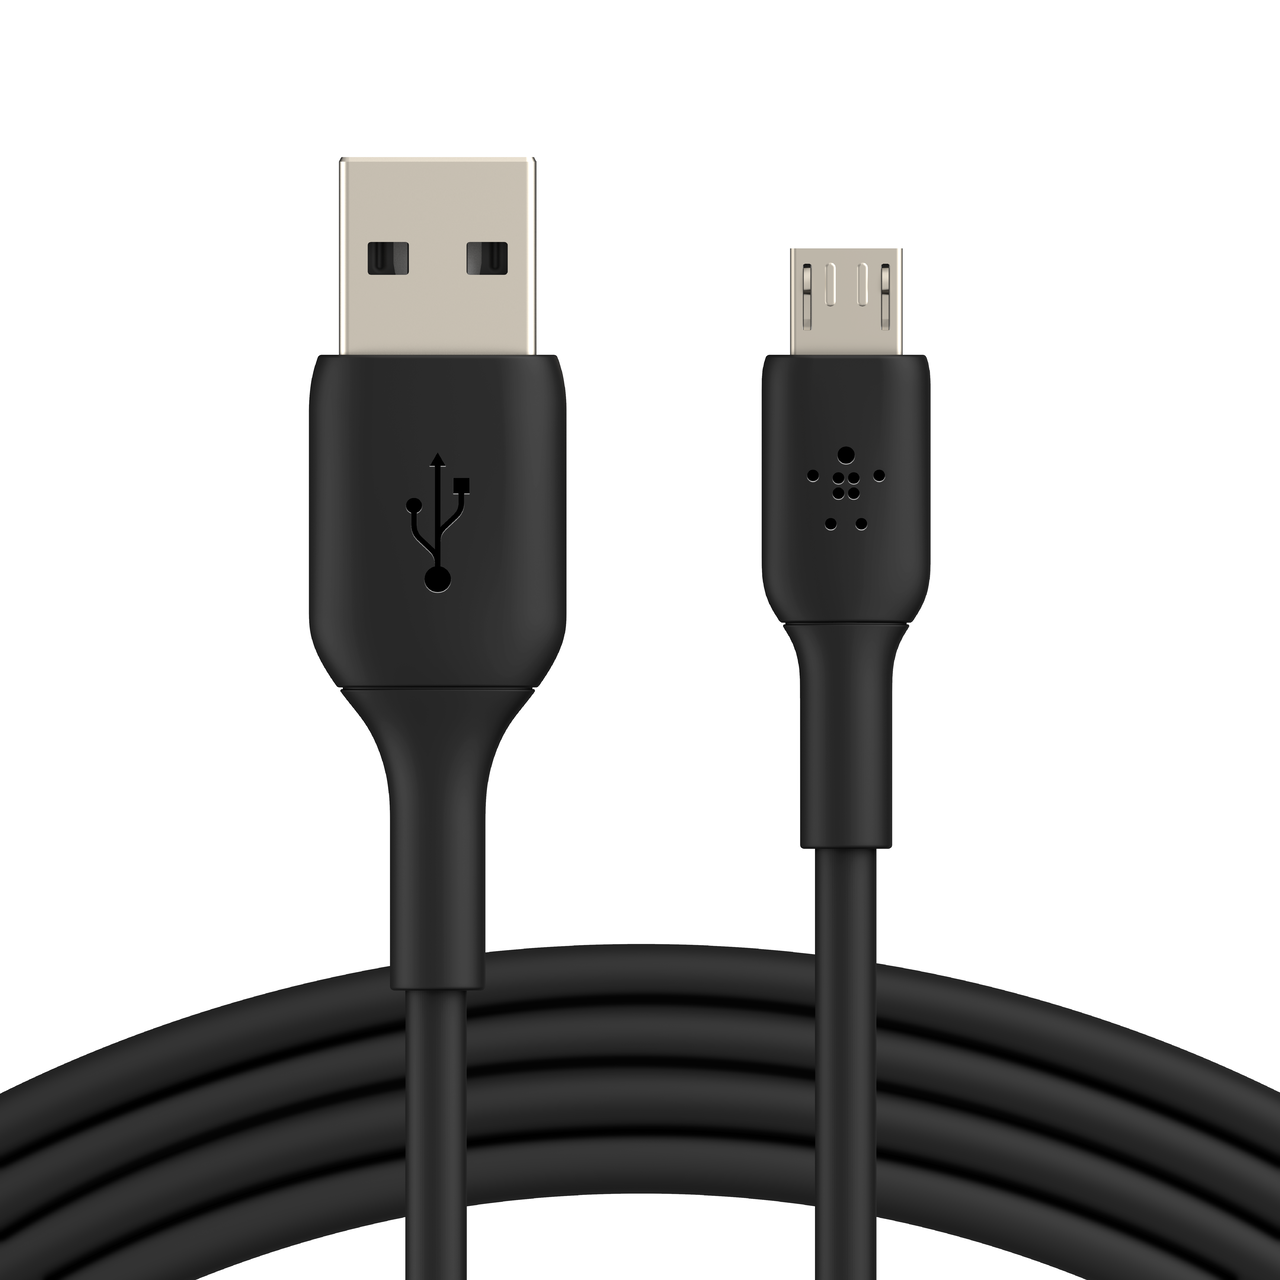 Belkin CAB005bt1MBK USB-A to Micro-USB Cable,Black